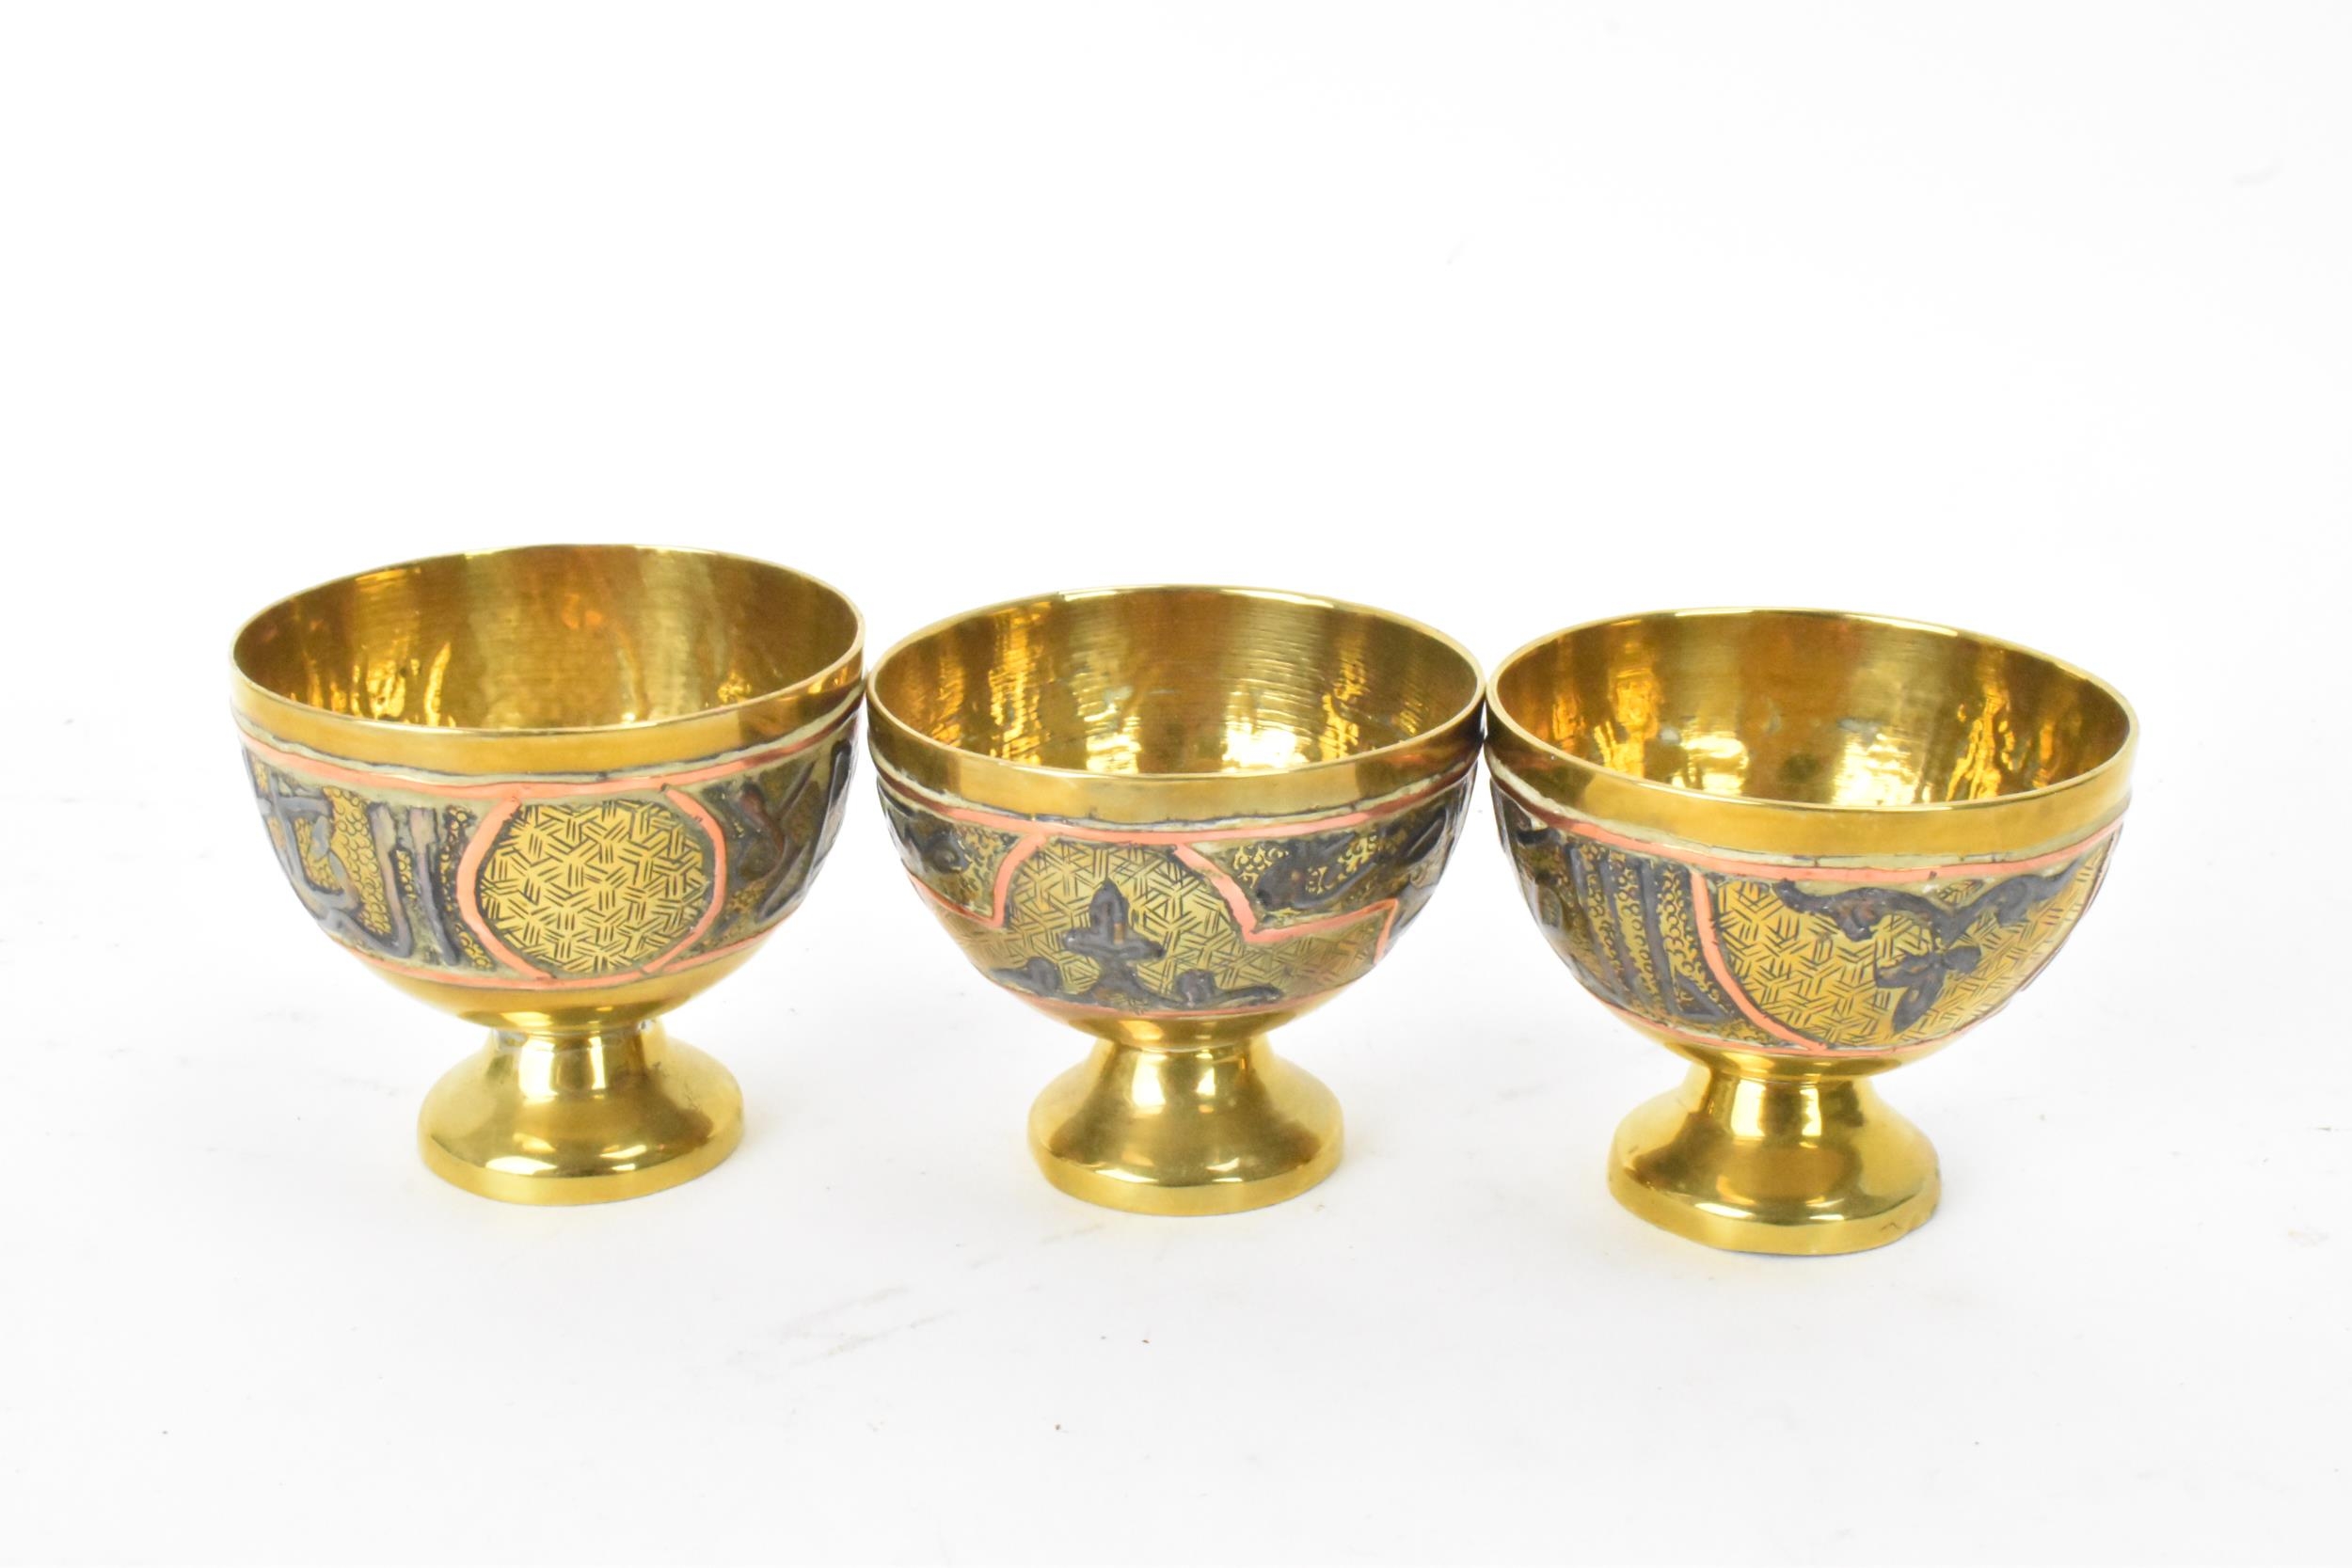 A 19th century Islamic Cairoware mamluk revival brass coffee/tea service, consisting of a tray 31. - Image 10 of 12